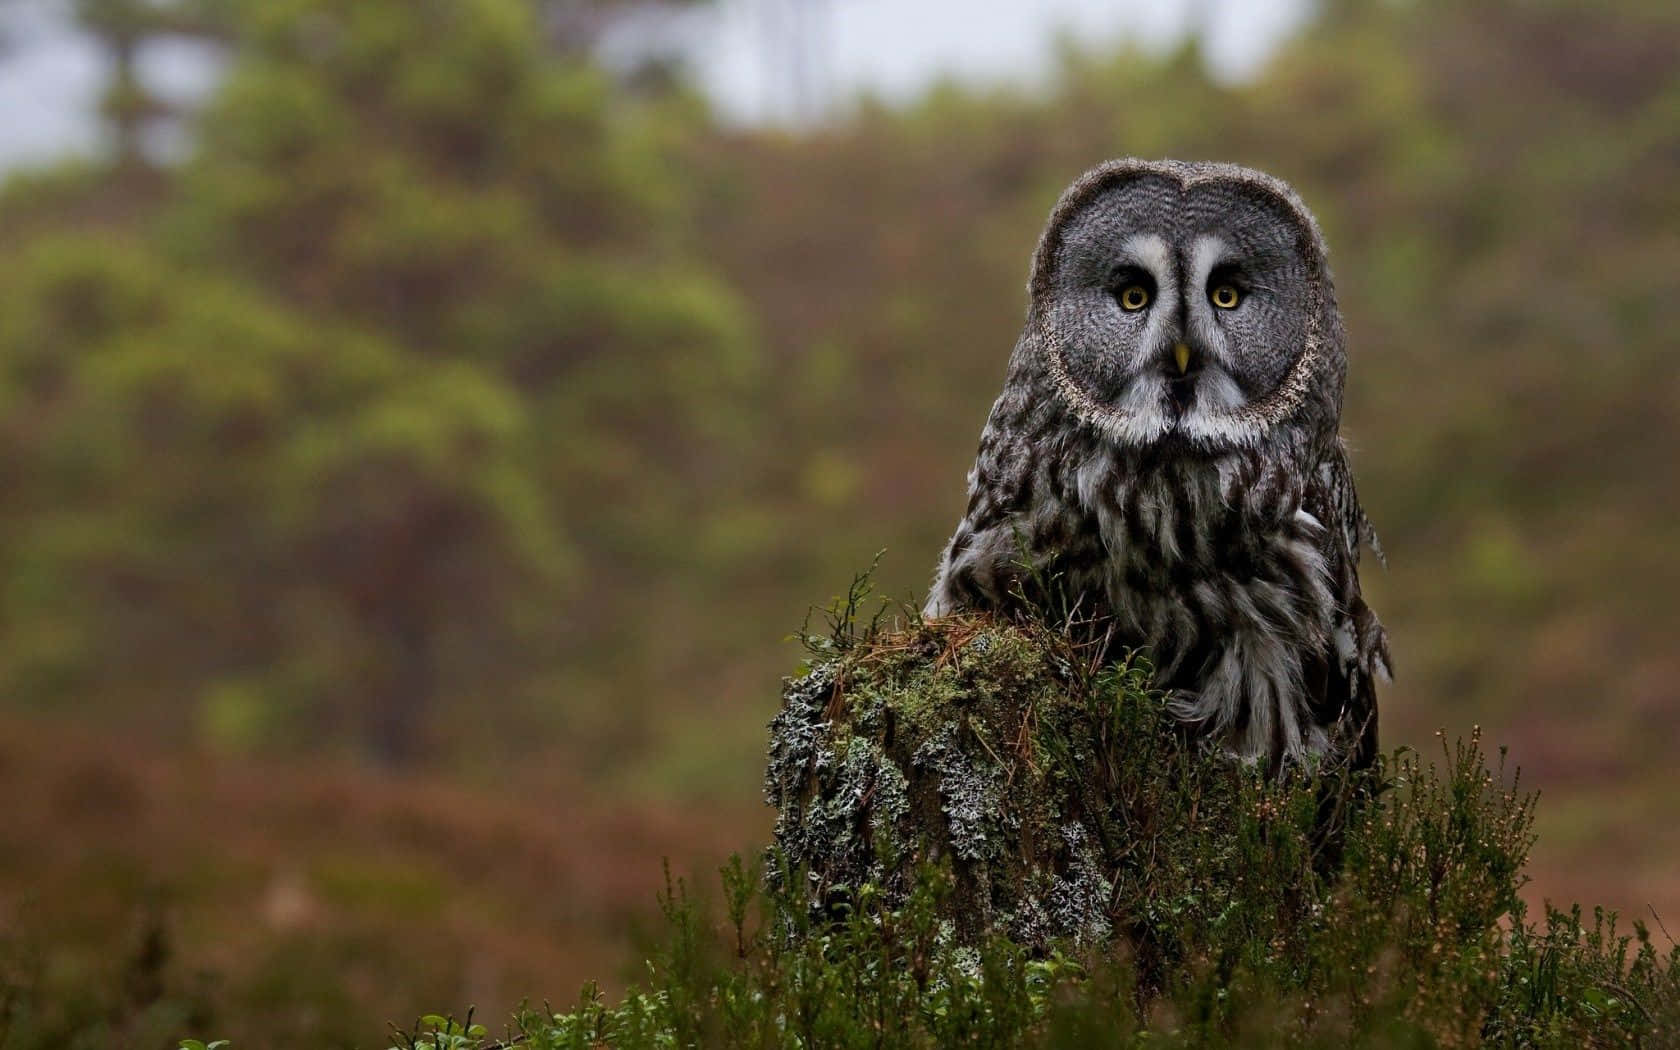 An owl scans its surroundings with its keen eyes